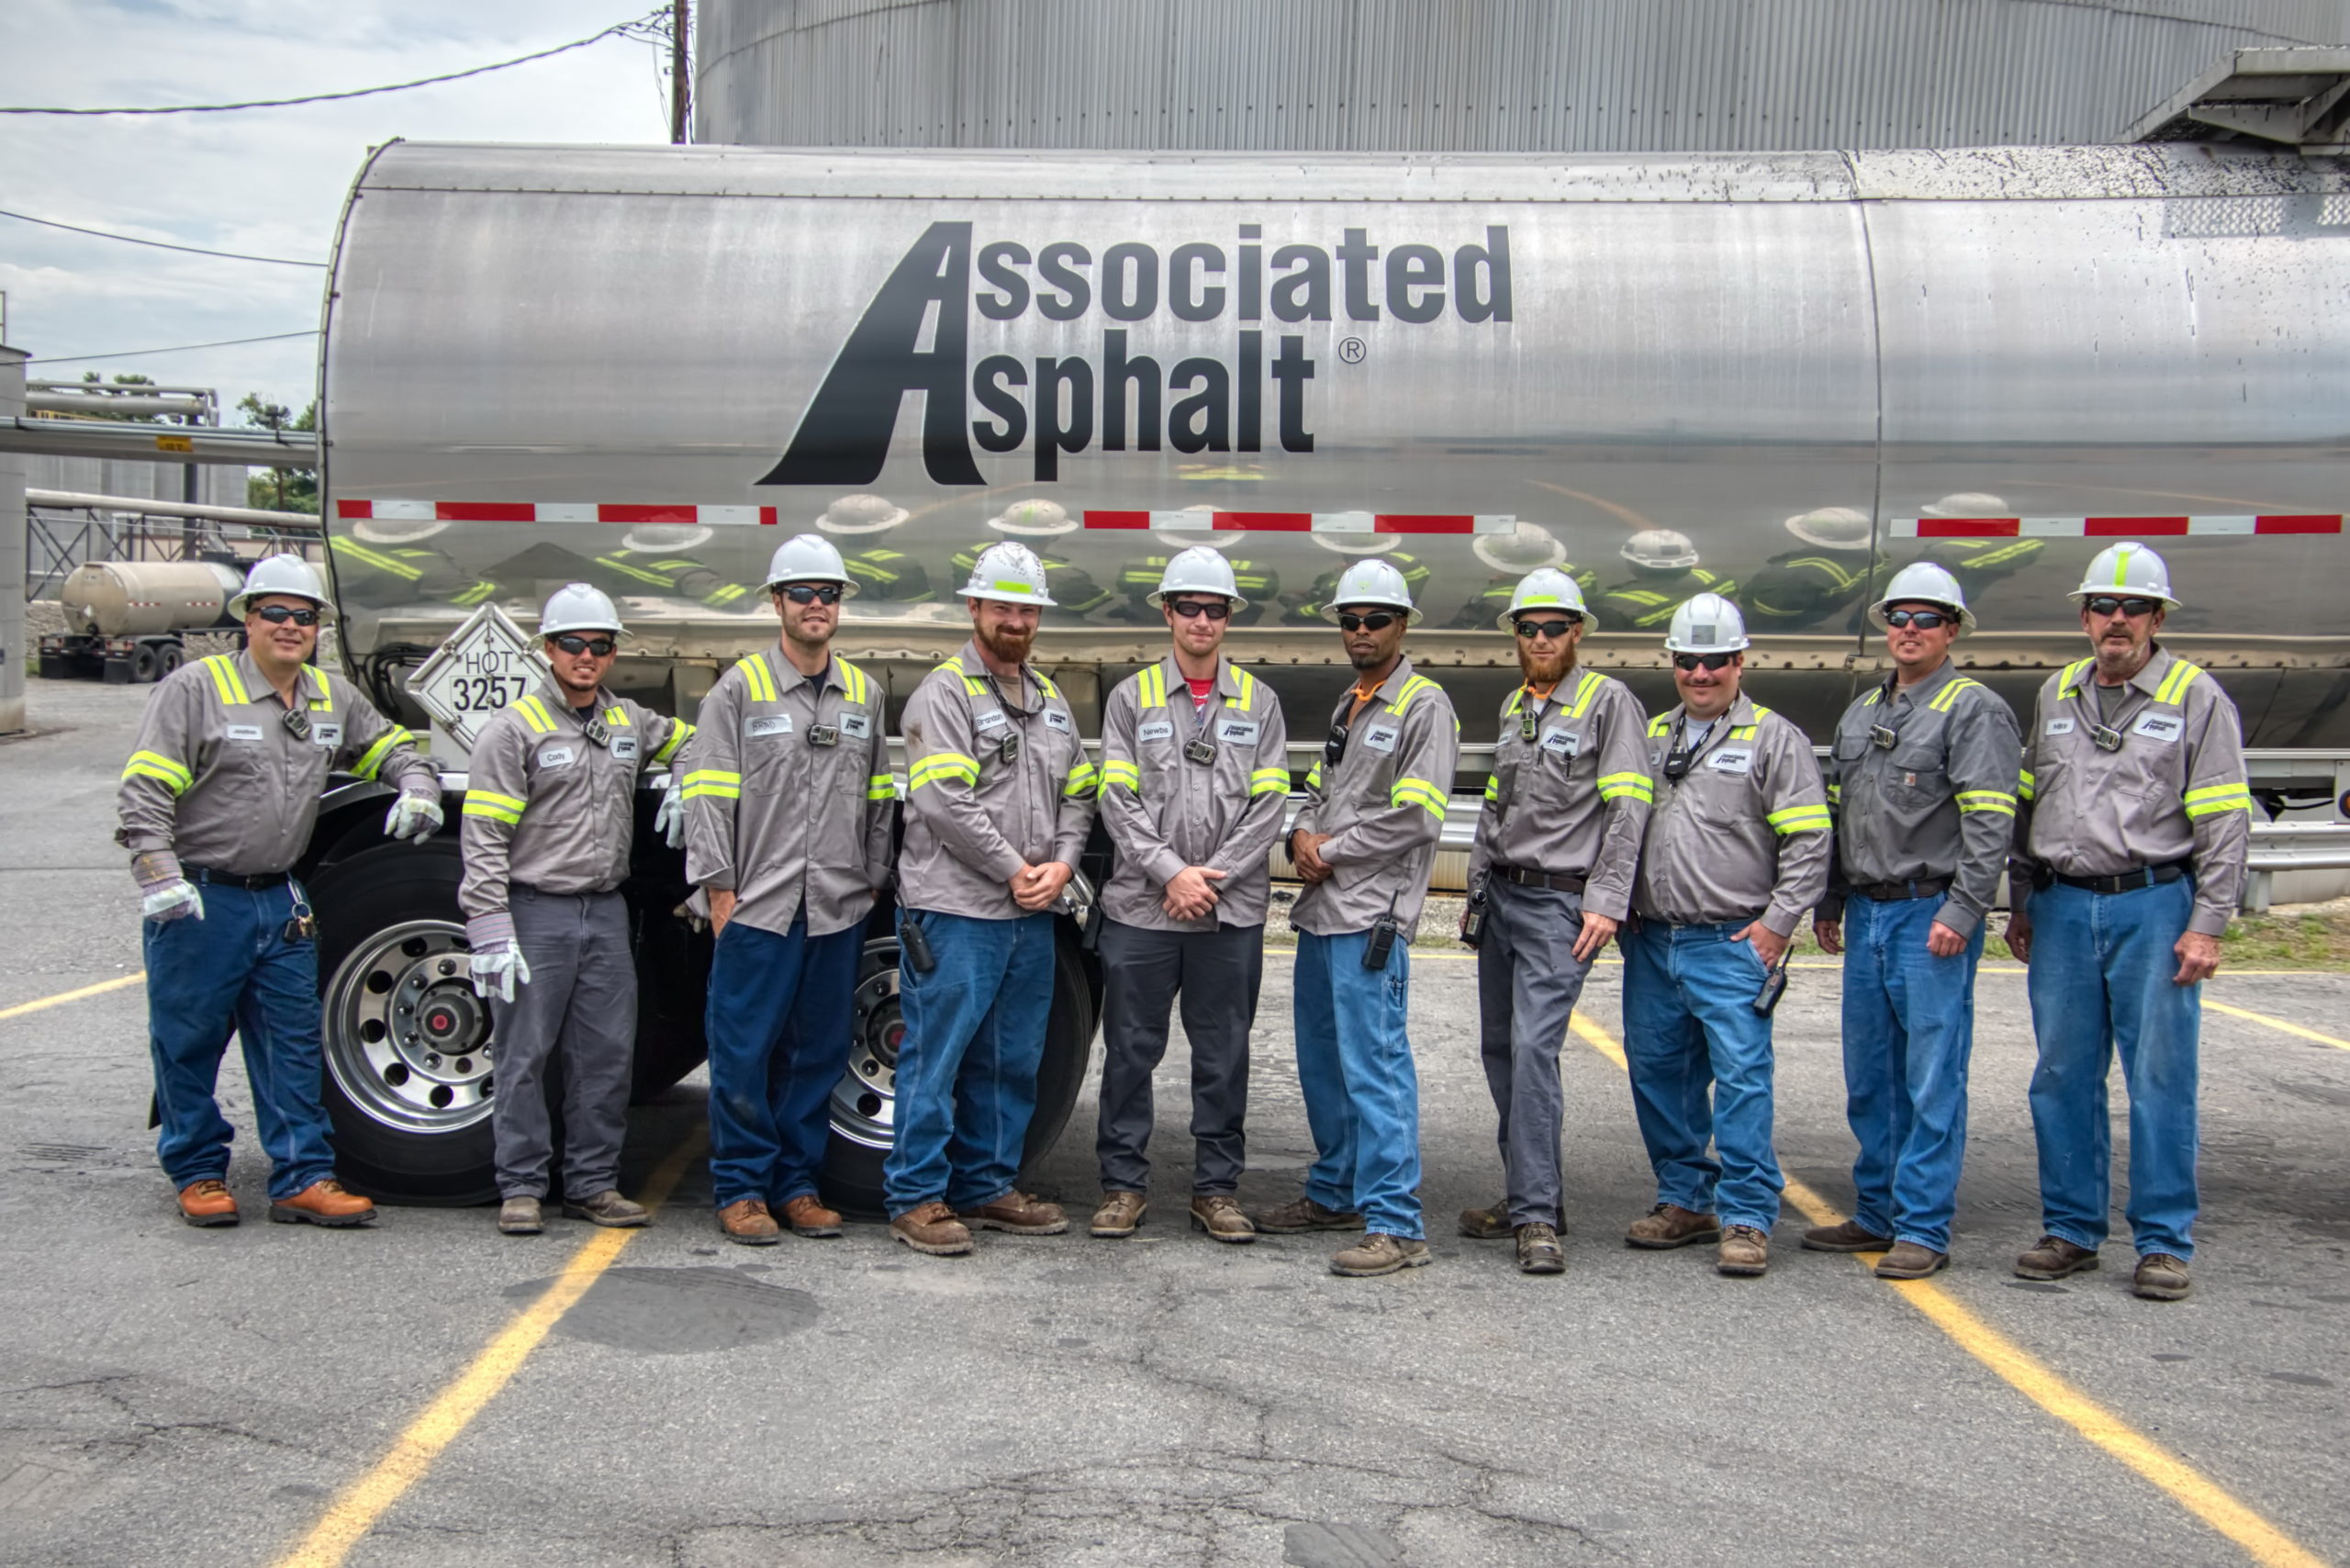 A group of field workers standing in front of a tanker with Associated Asphalts' logo.